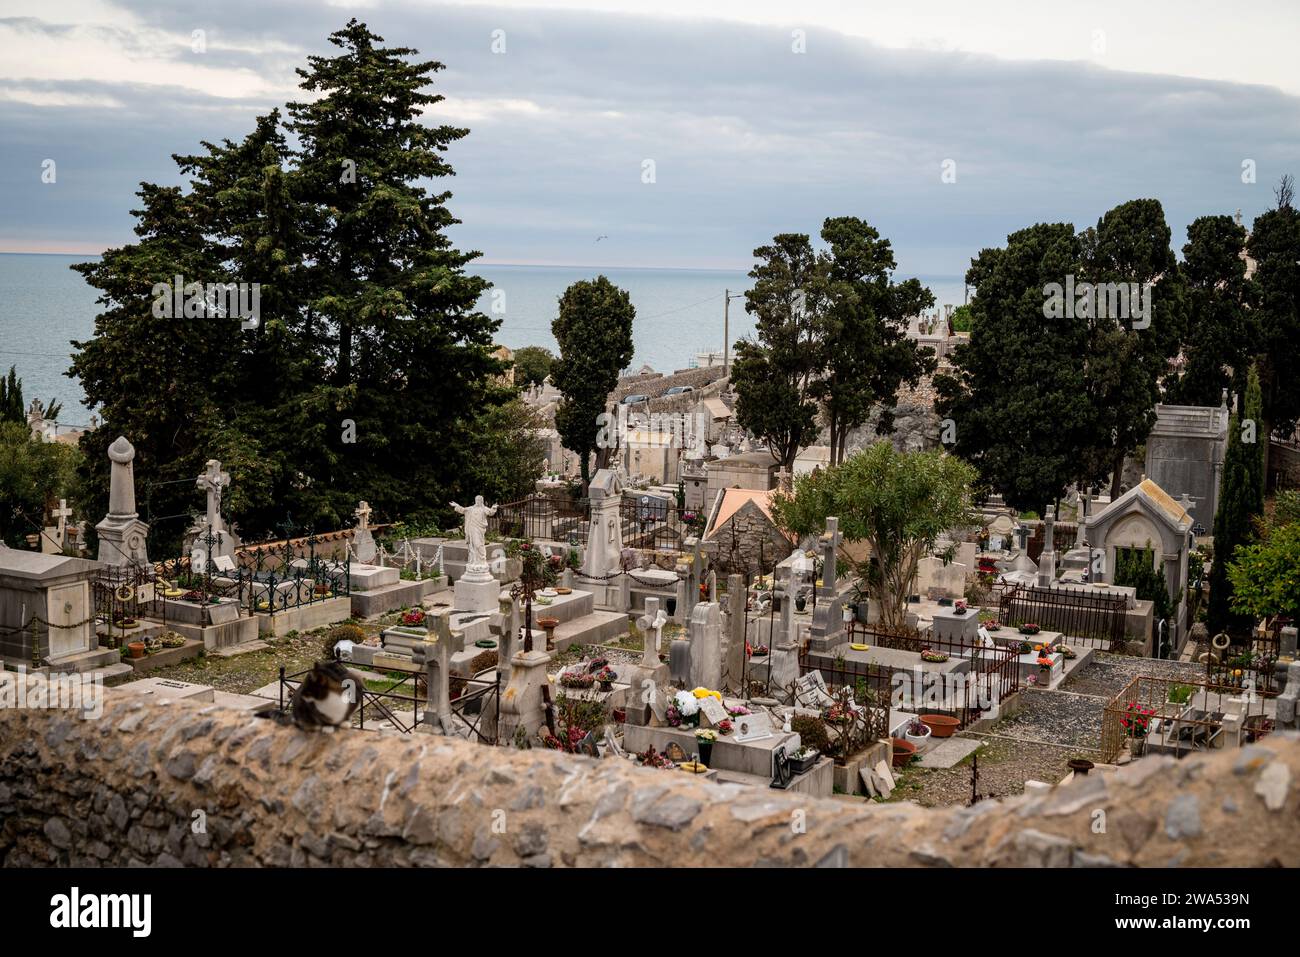 Cimetière Marin or The sea cemetery in Sète, a major port city in the southeast French region of Occitanie, France Stock Photo